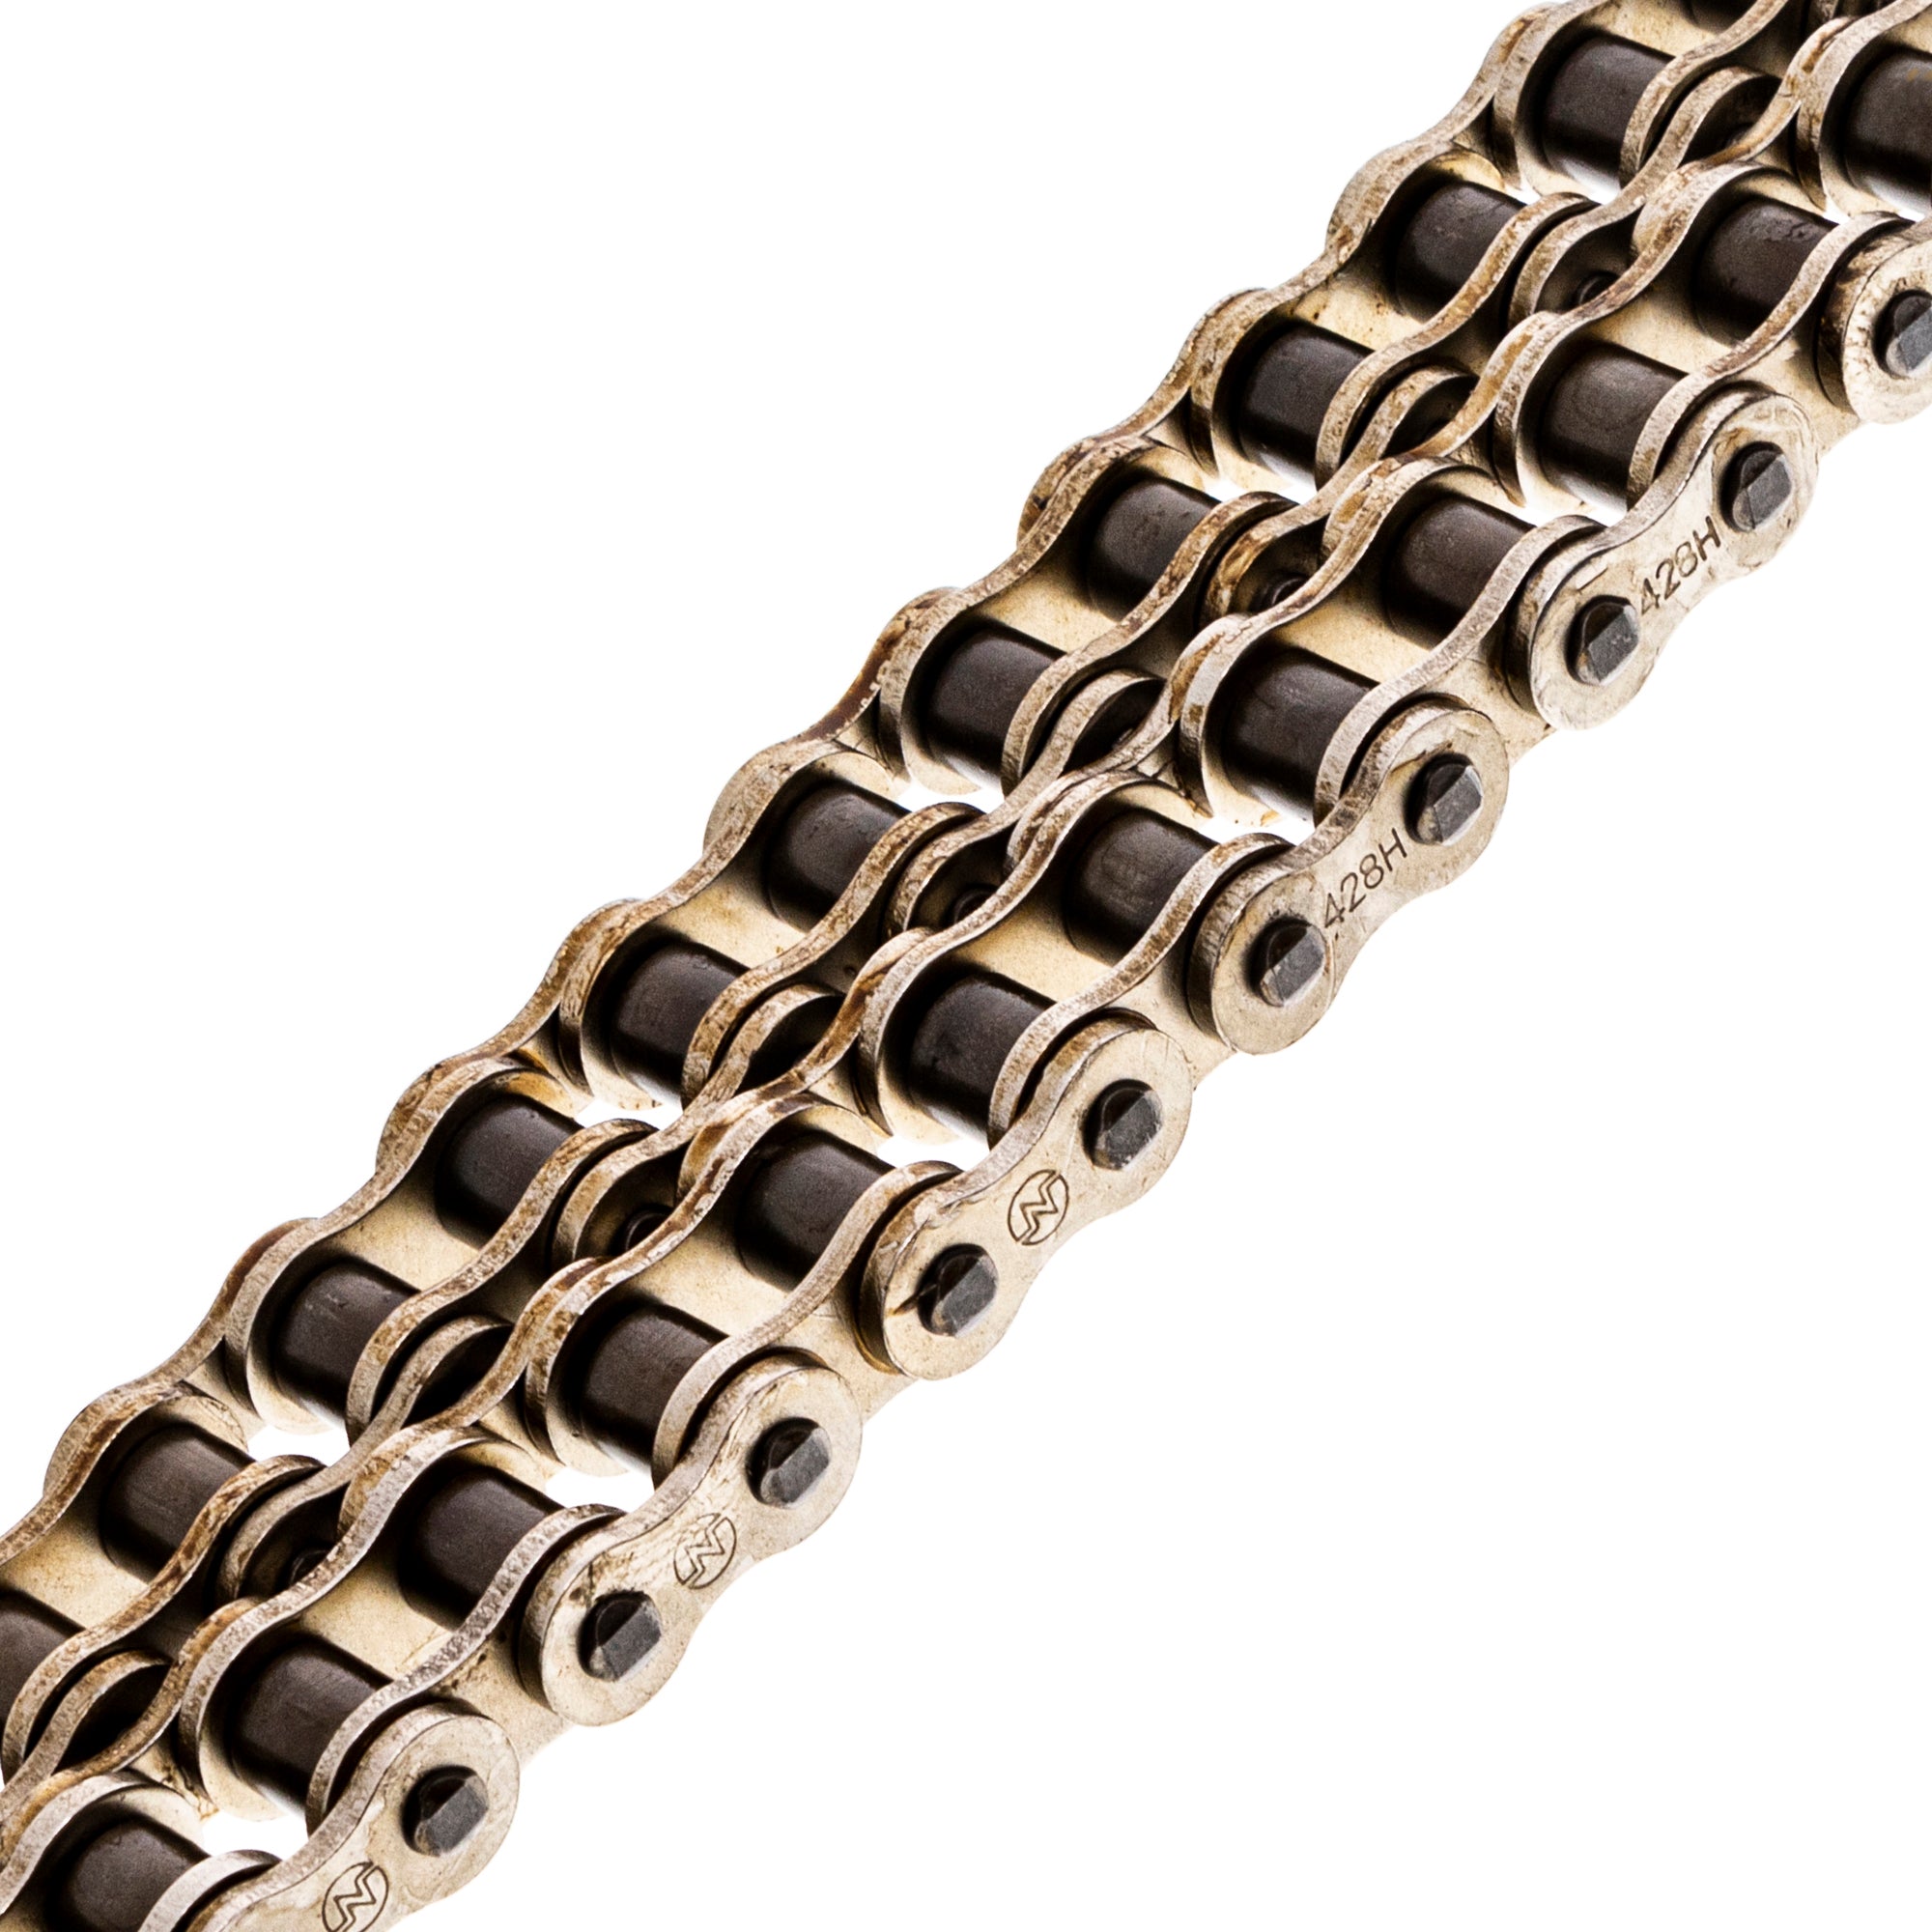 Drive Chain 100 Standard Non O-Ring w/ Master Link for zOTHER TRX90 SporTrax Mojave KLT110 NICHE 519-CDC2268H